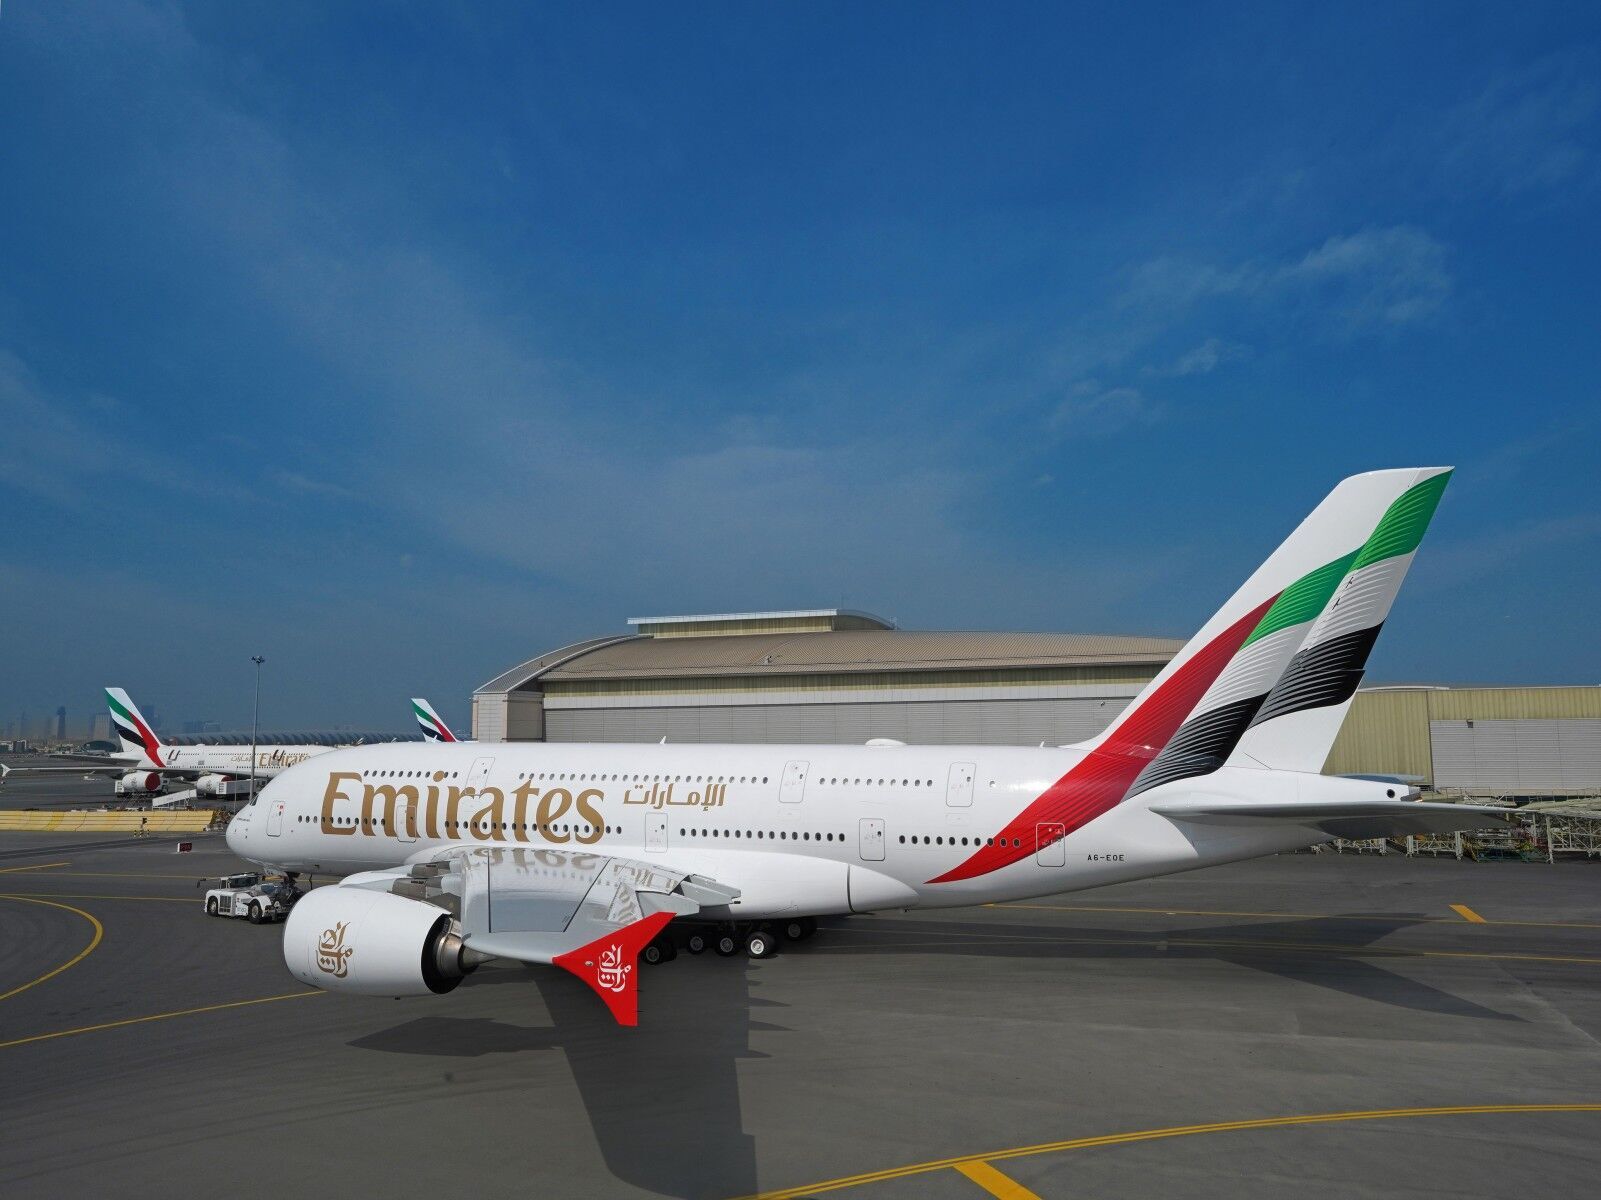 Emirates to offer passengers new vegan dishes by expanding menu